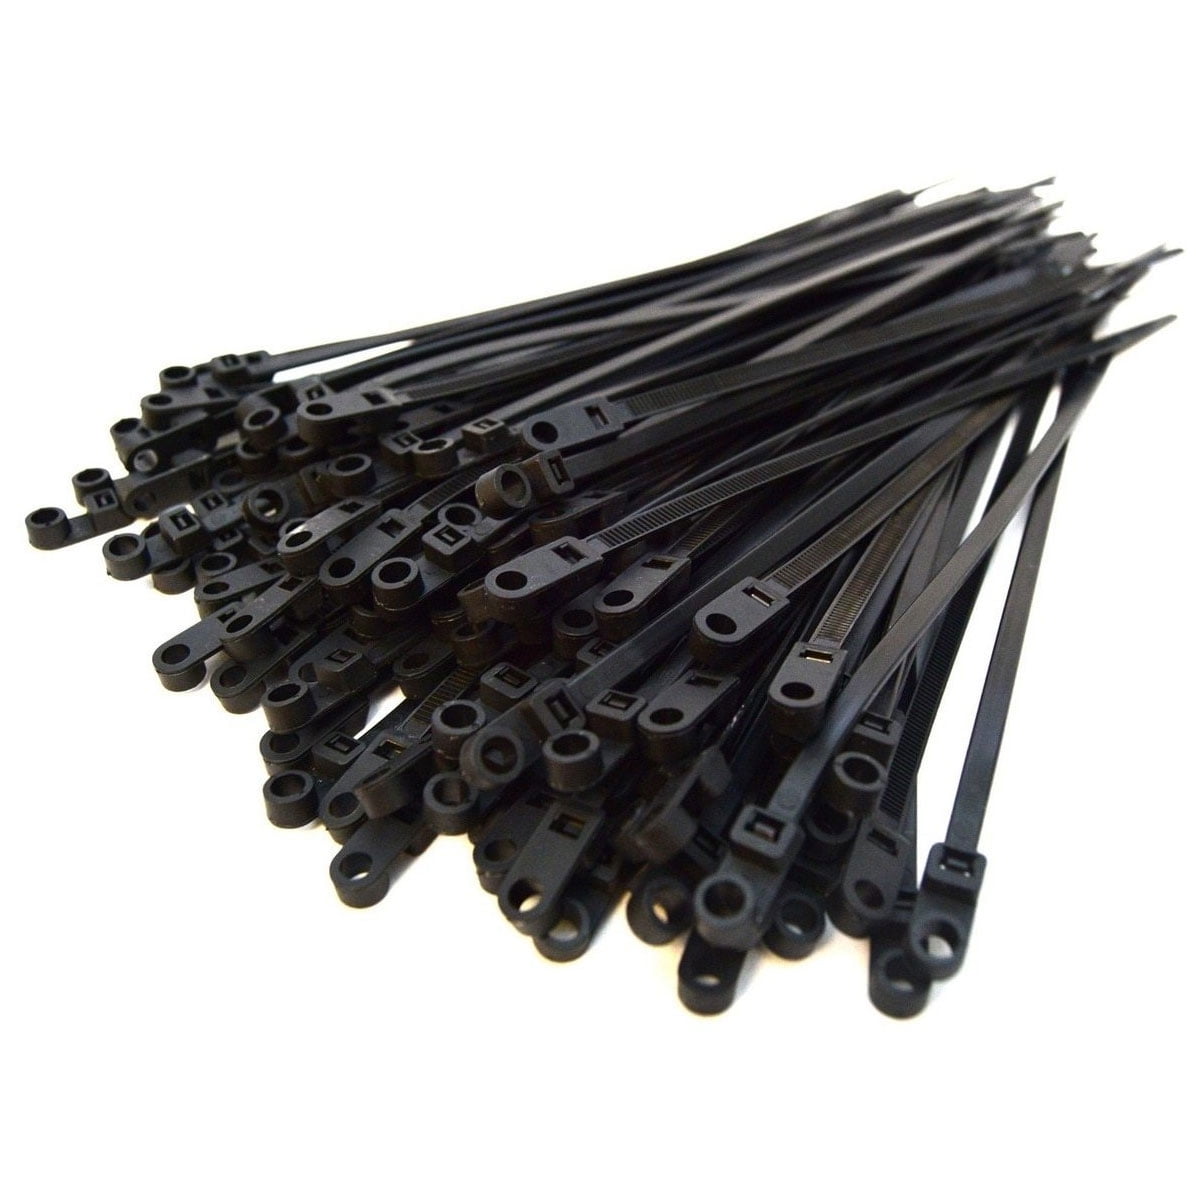 Cable Zip Ties 2000pcs 4" UV Resistant black 18lb Zip Ties Made in the USA 